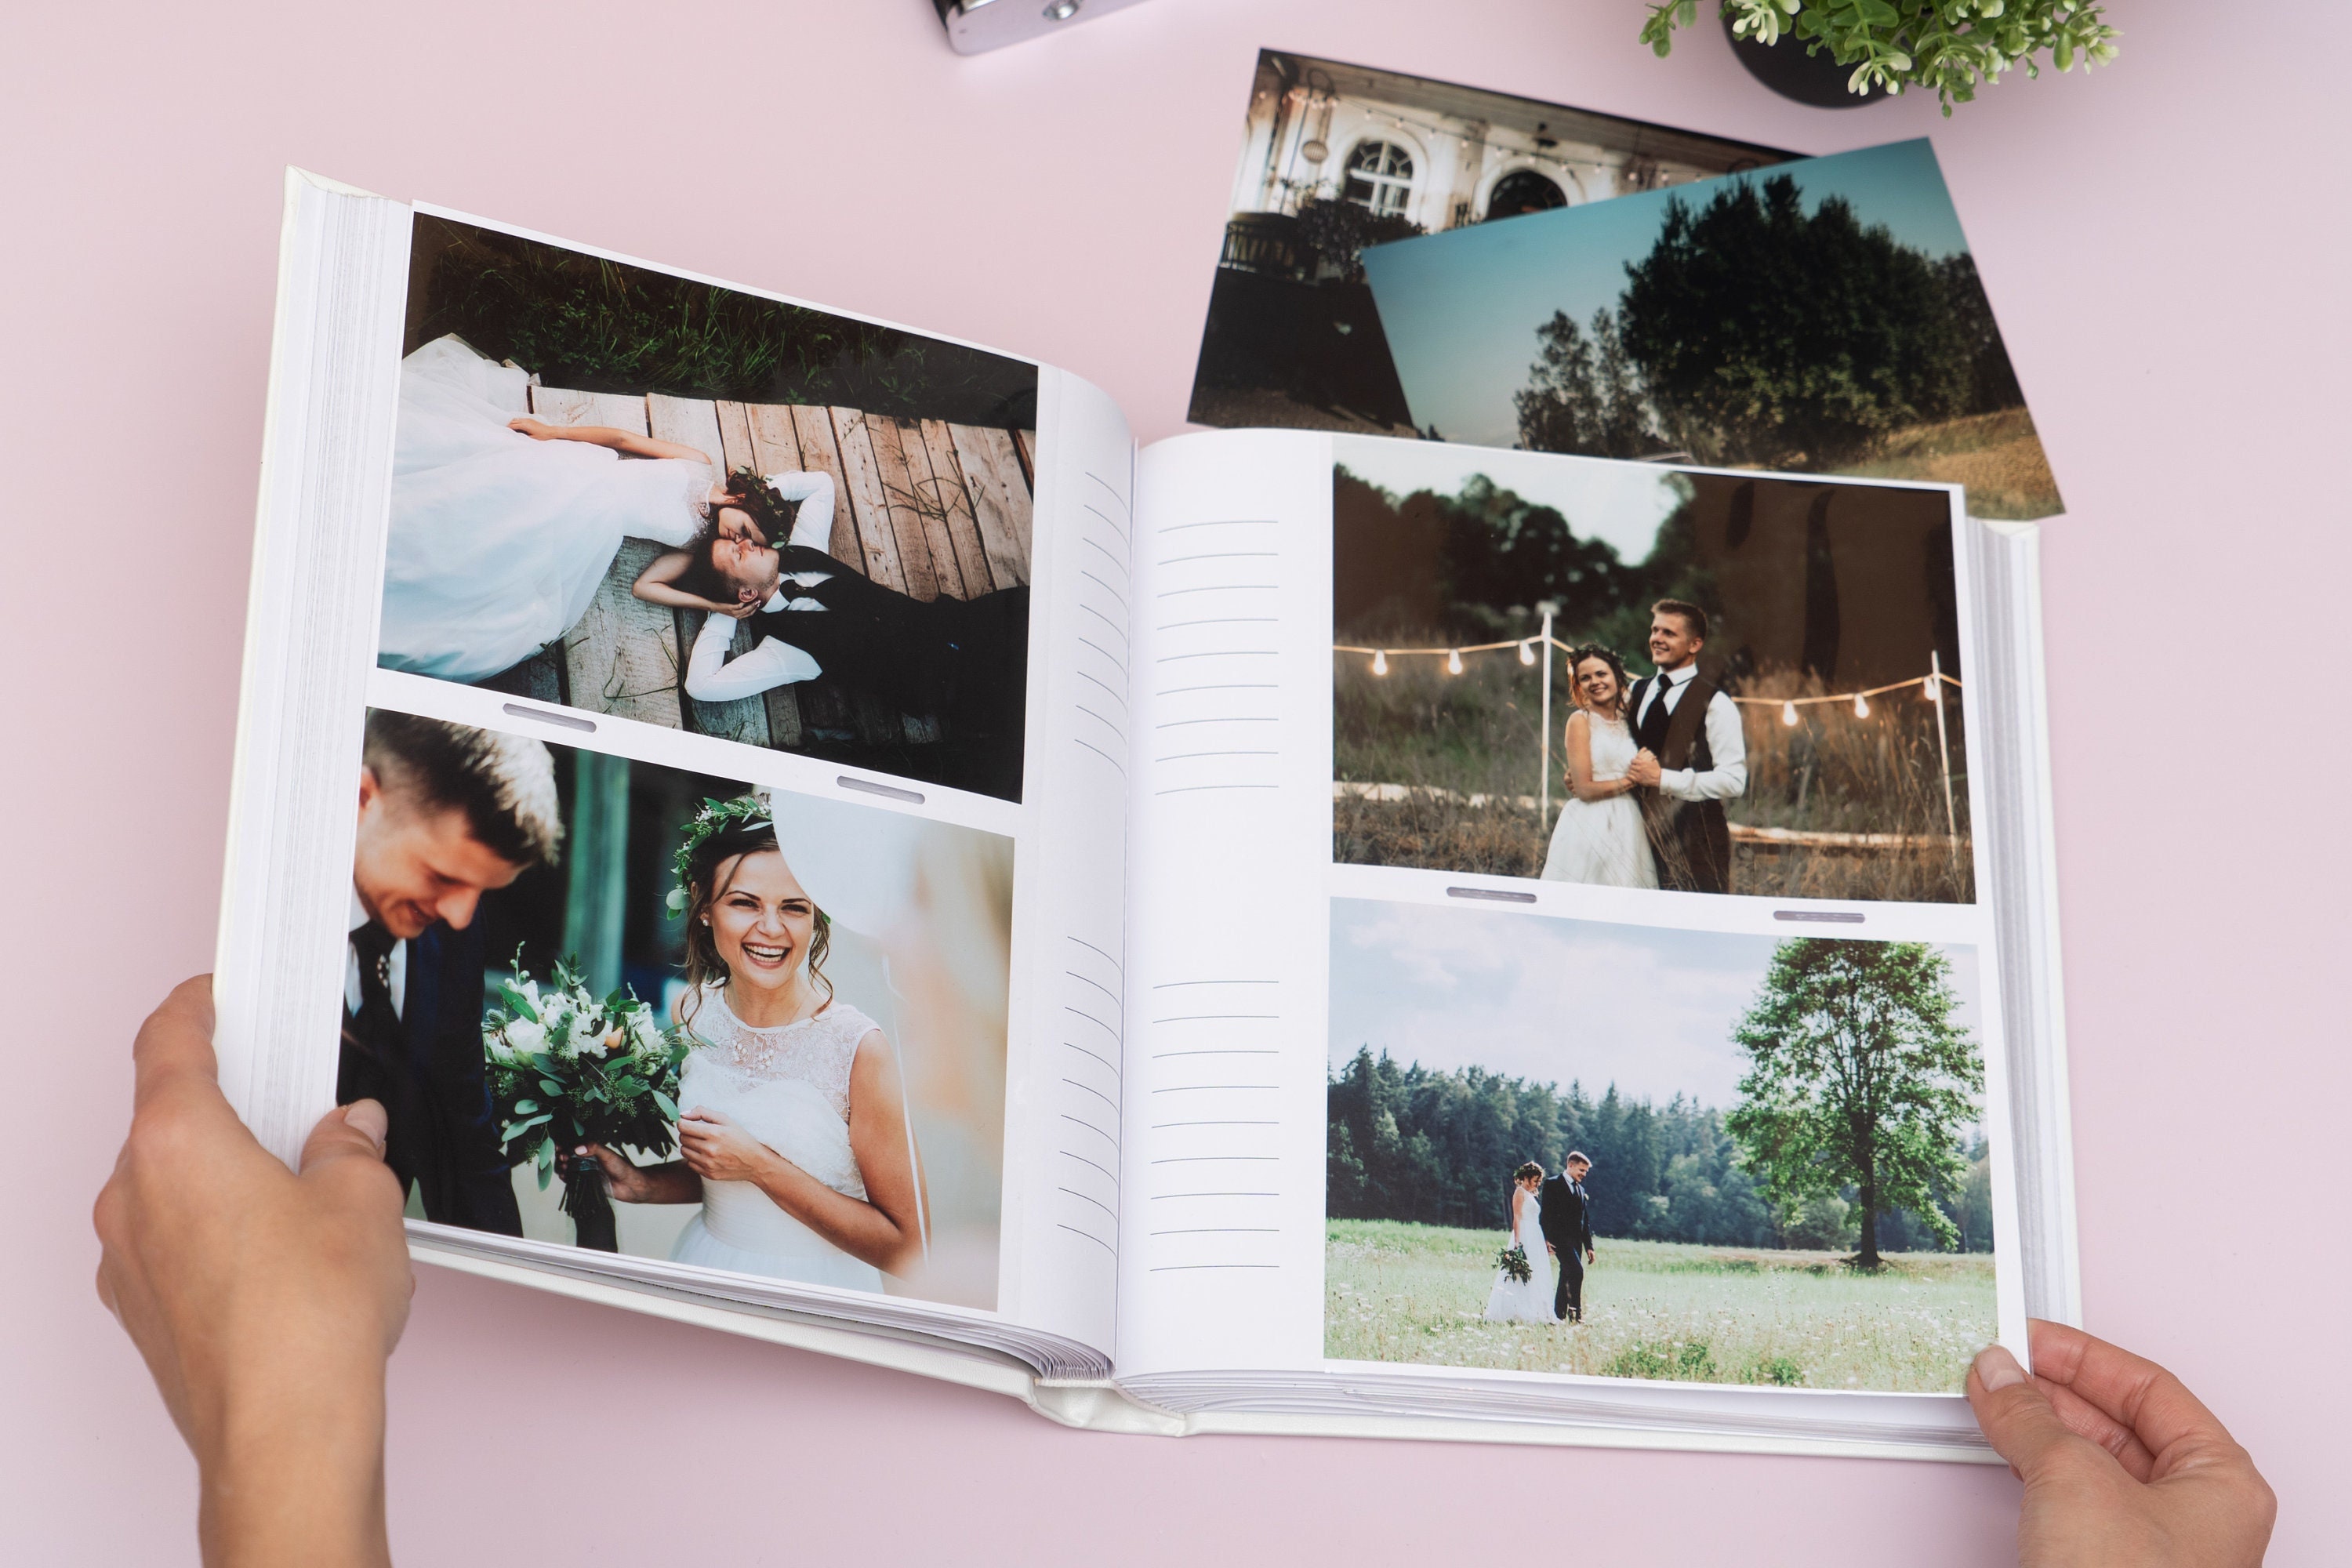  Artmag Photo Album 5x7 Clear Pages Pockets Leather Cover Slip  Slide in Photo Album Book Holds 100 Vertical 5x7 Photos Picture Book for  Wedding Family (Pink) : Home & Kitchen